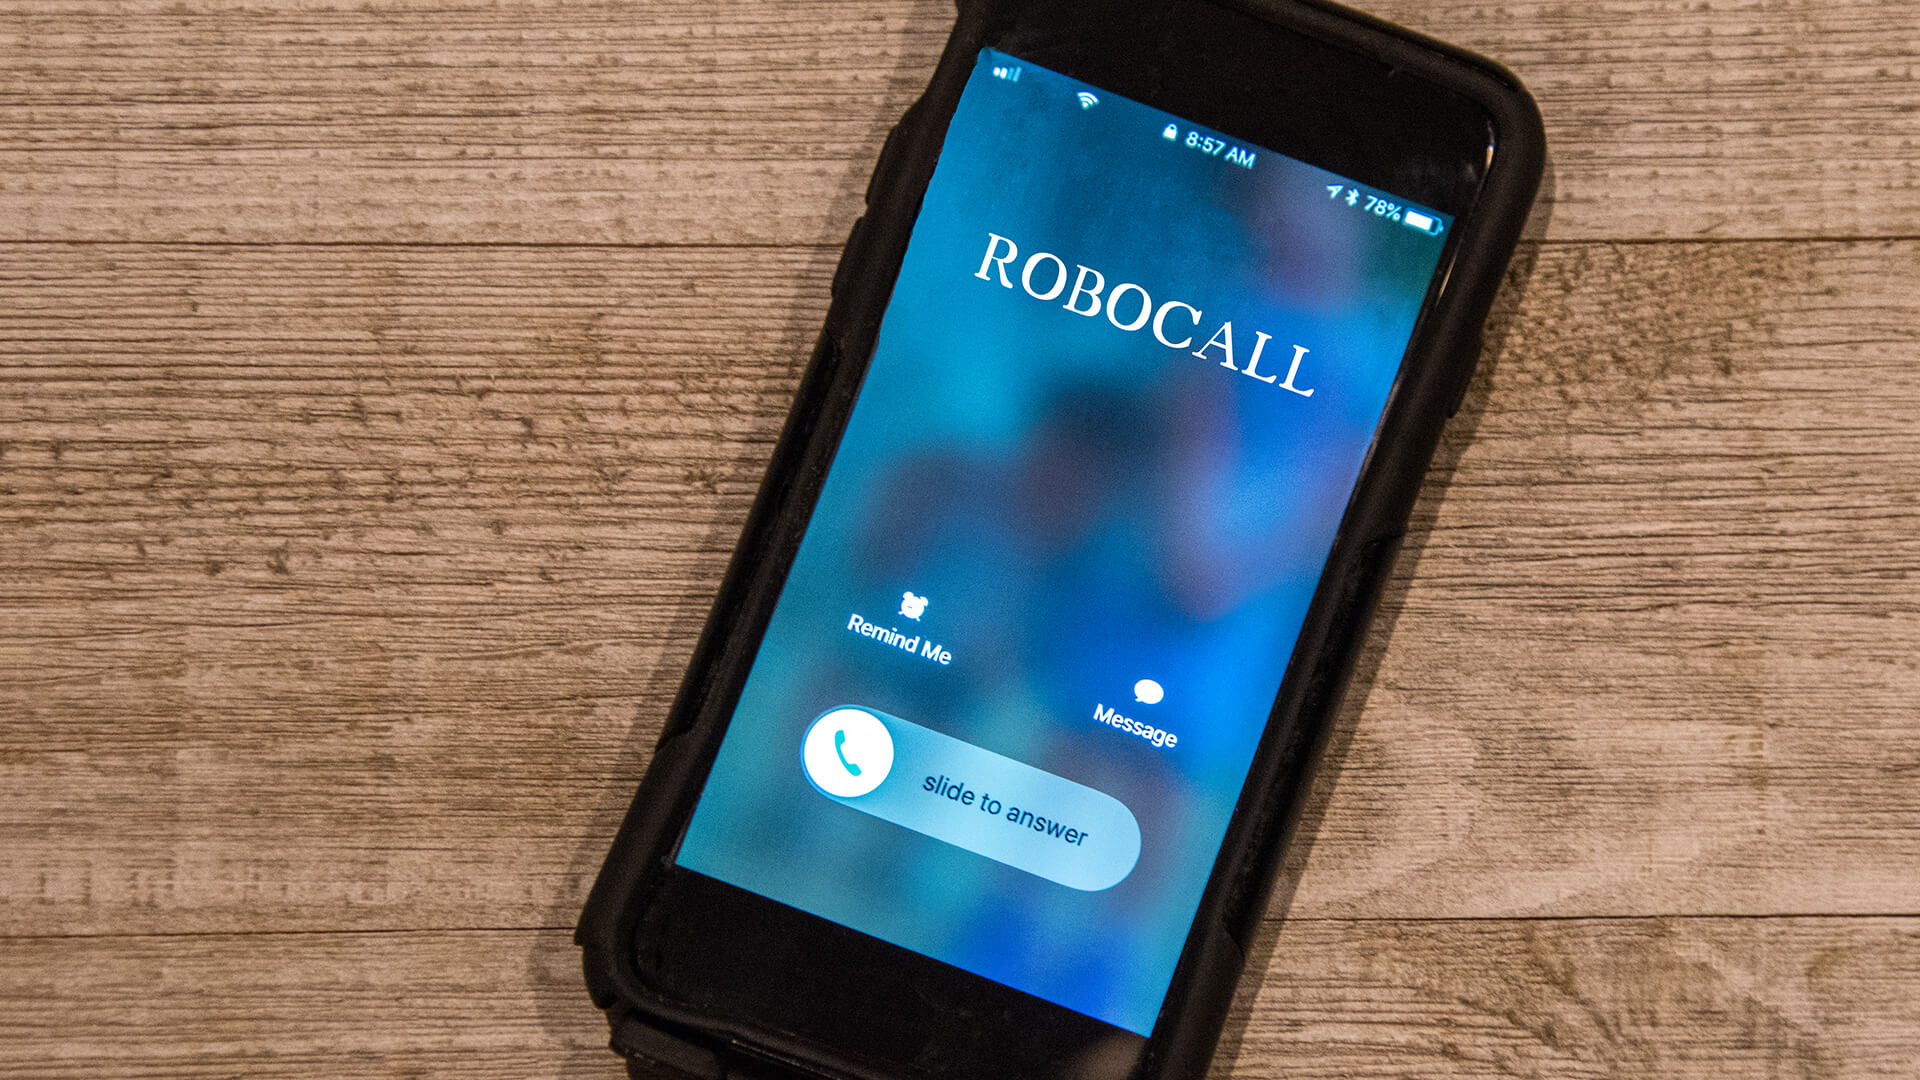 Google Business Profile robocall scams are increasing